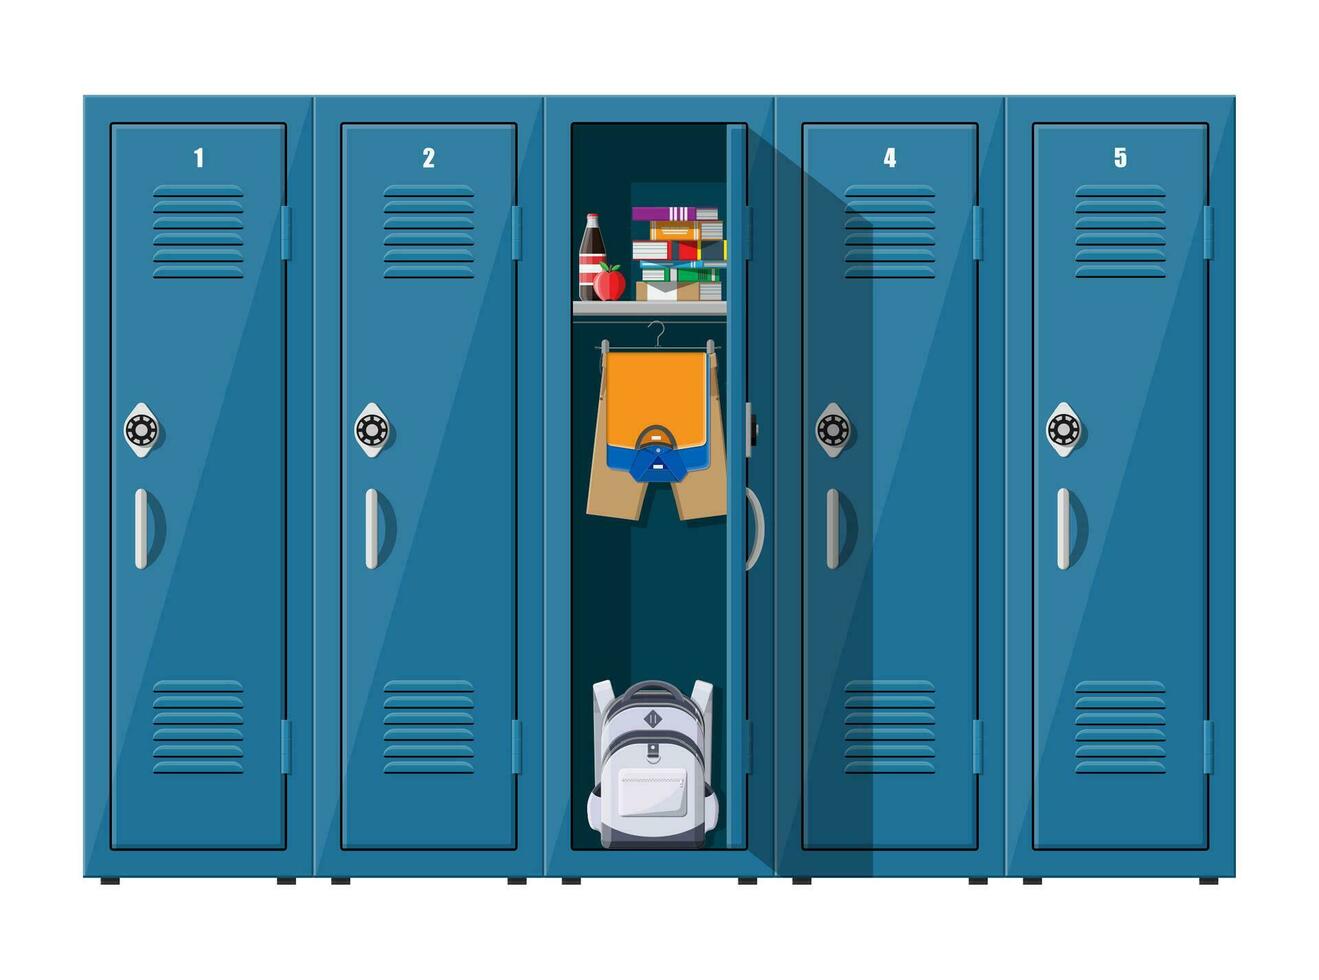 Blue metal cabinets. Lockers in school with silver handles and locks. Safe box with doors, cupboard, compartment. Books, food, clothes and backpack inside. Vector illustration in flat style